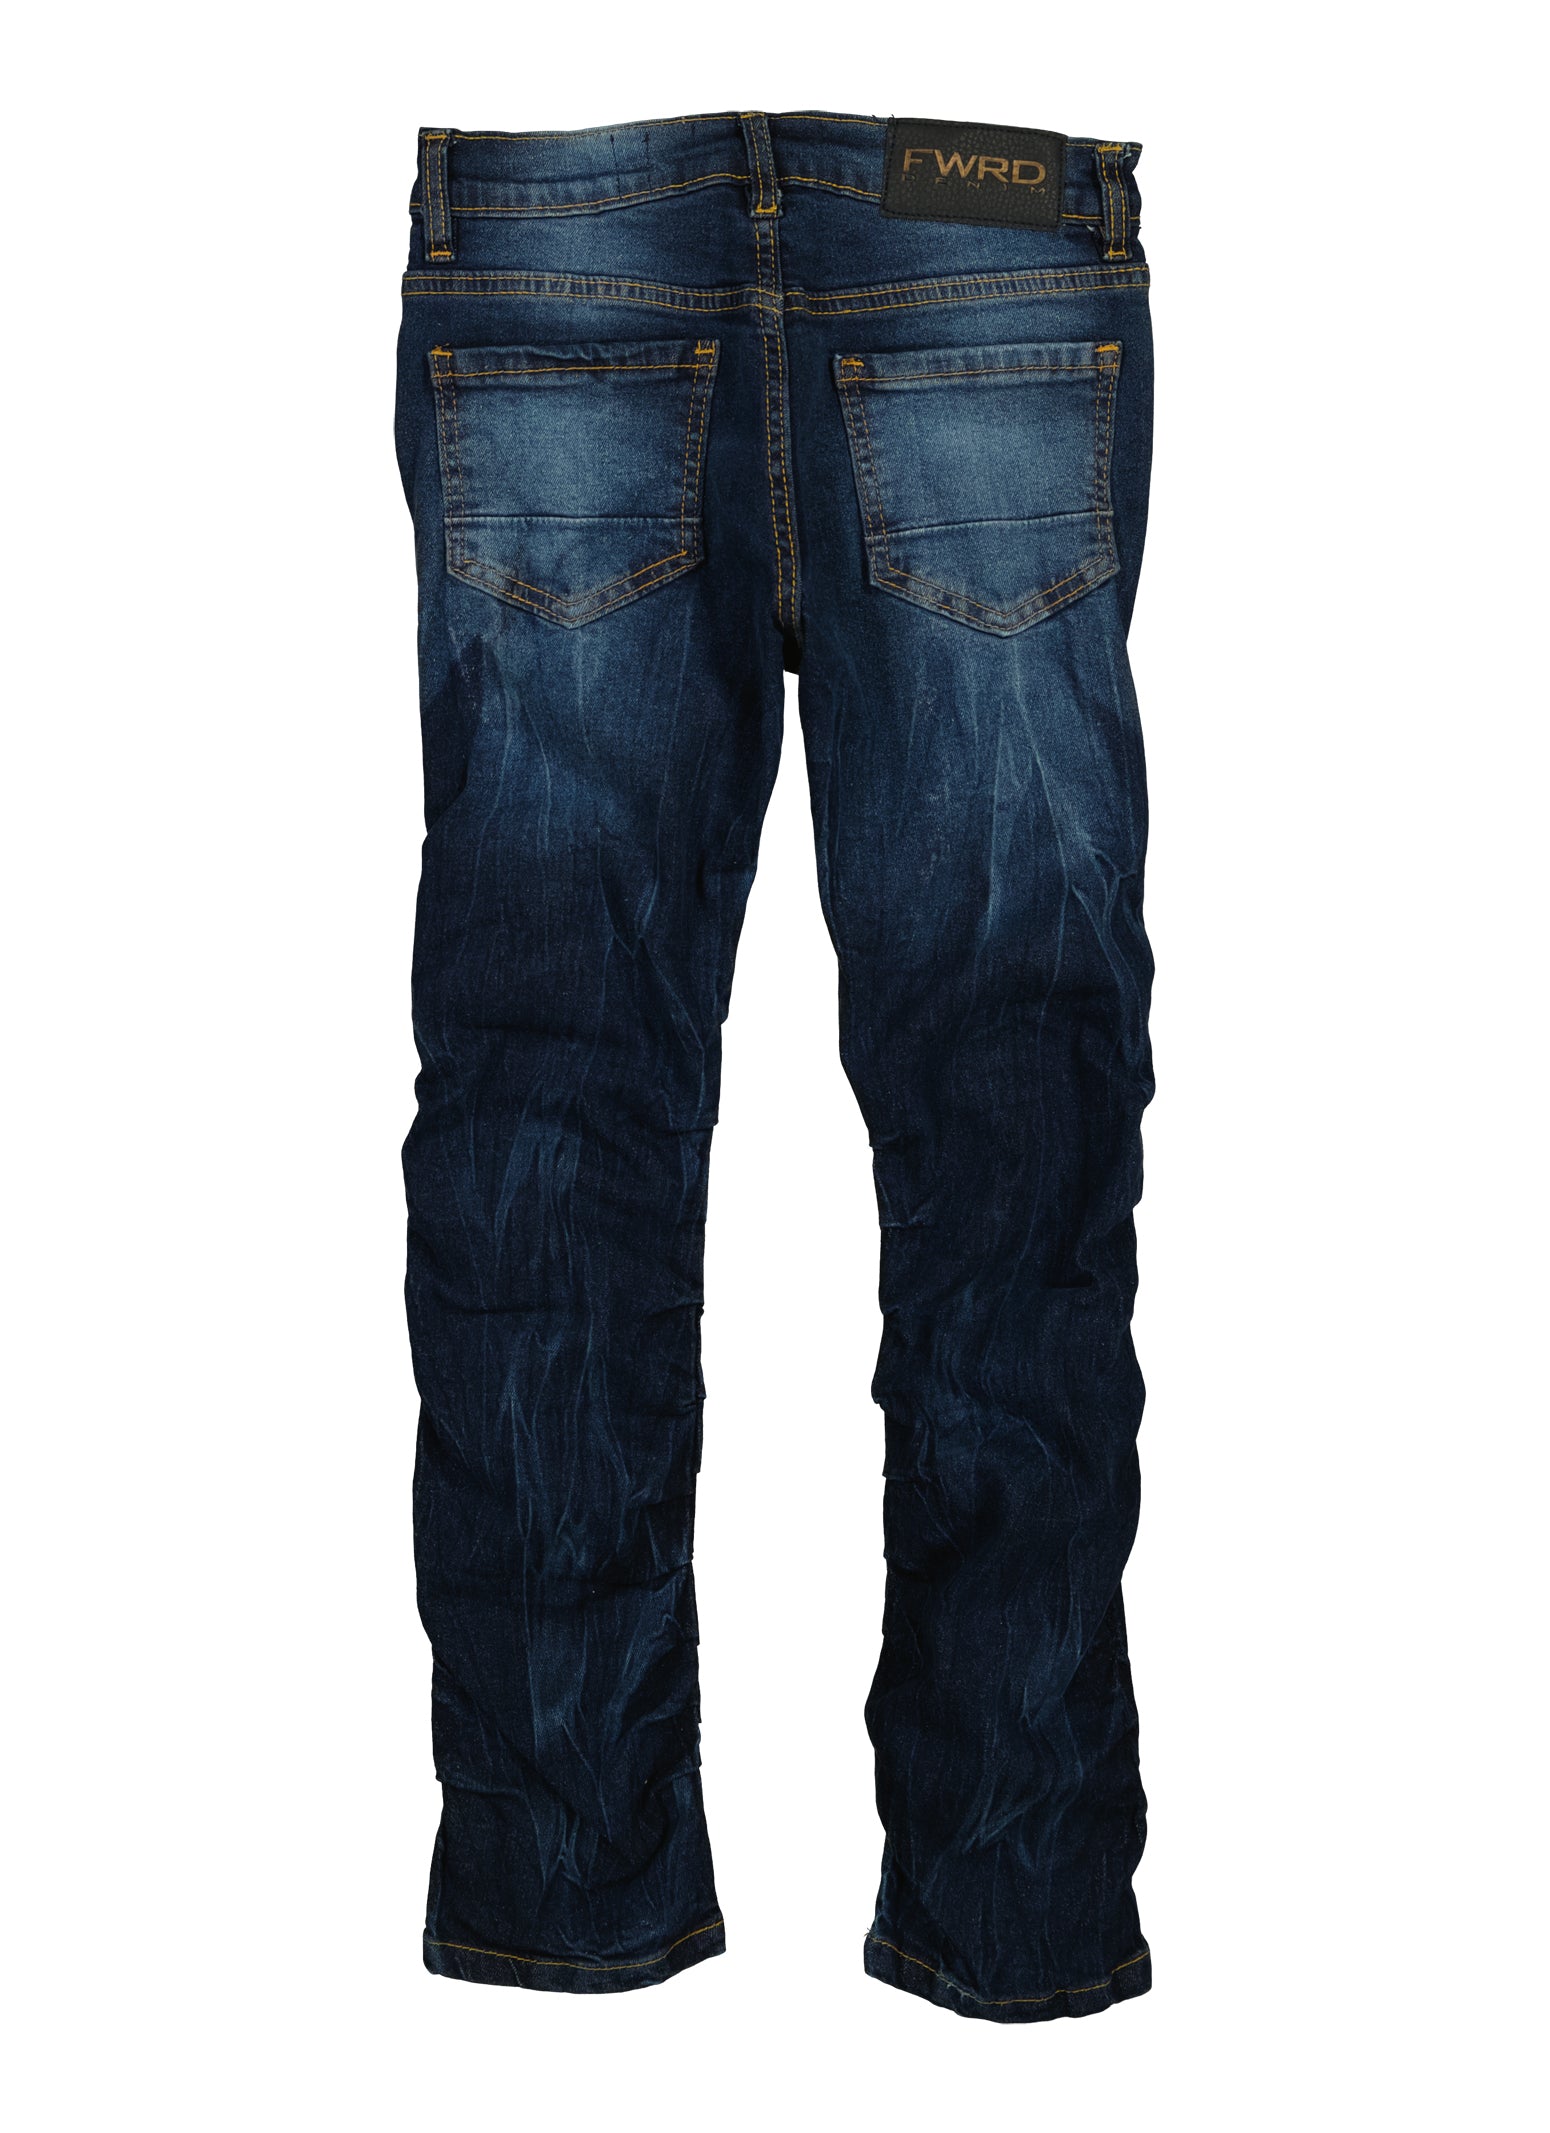 Boys Distressed Whiskered Stacked Jeans